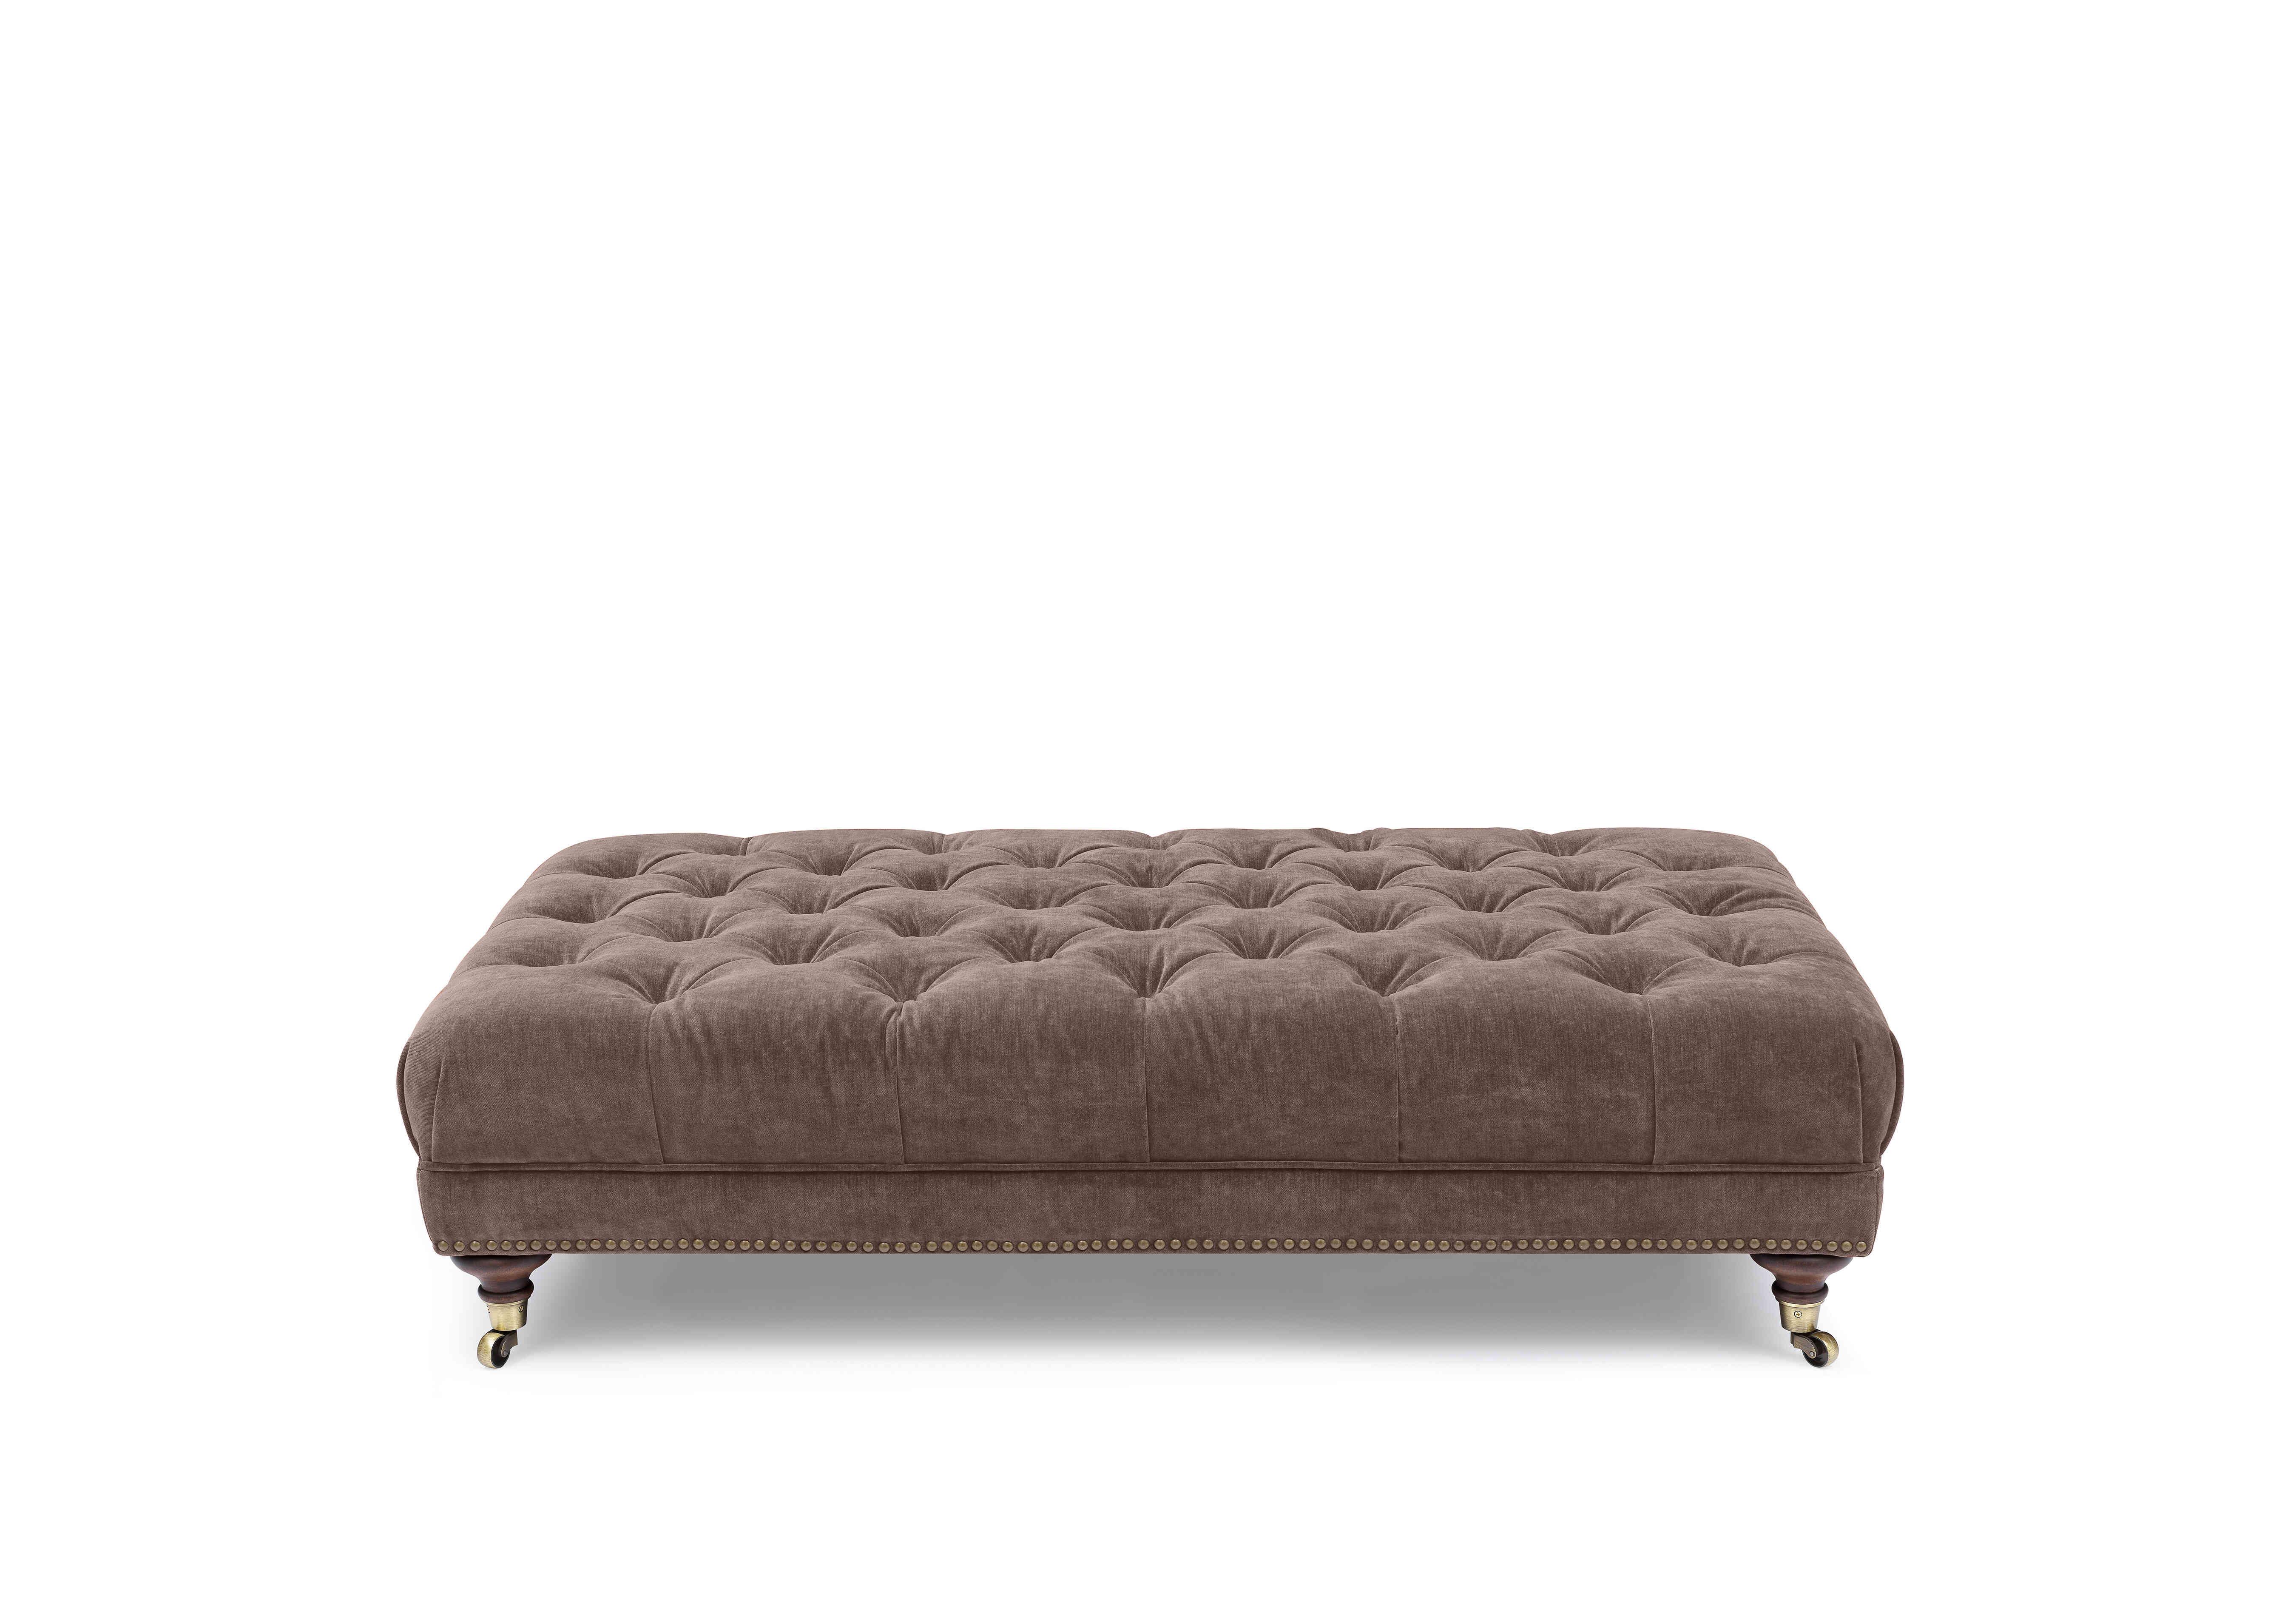 Wallace Fabric Rectangular Footstool with Castors in X3y1-W023 Antler on Furniture Village